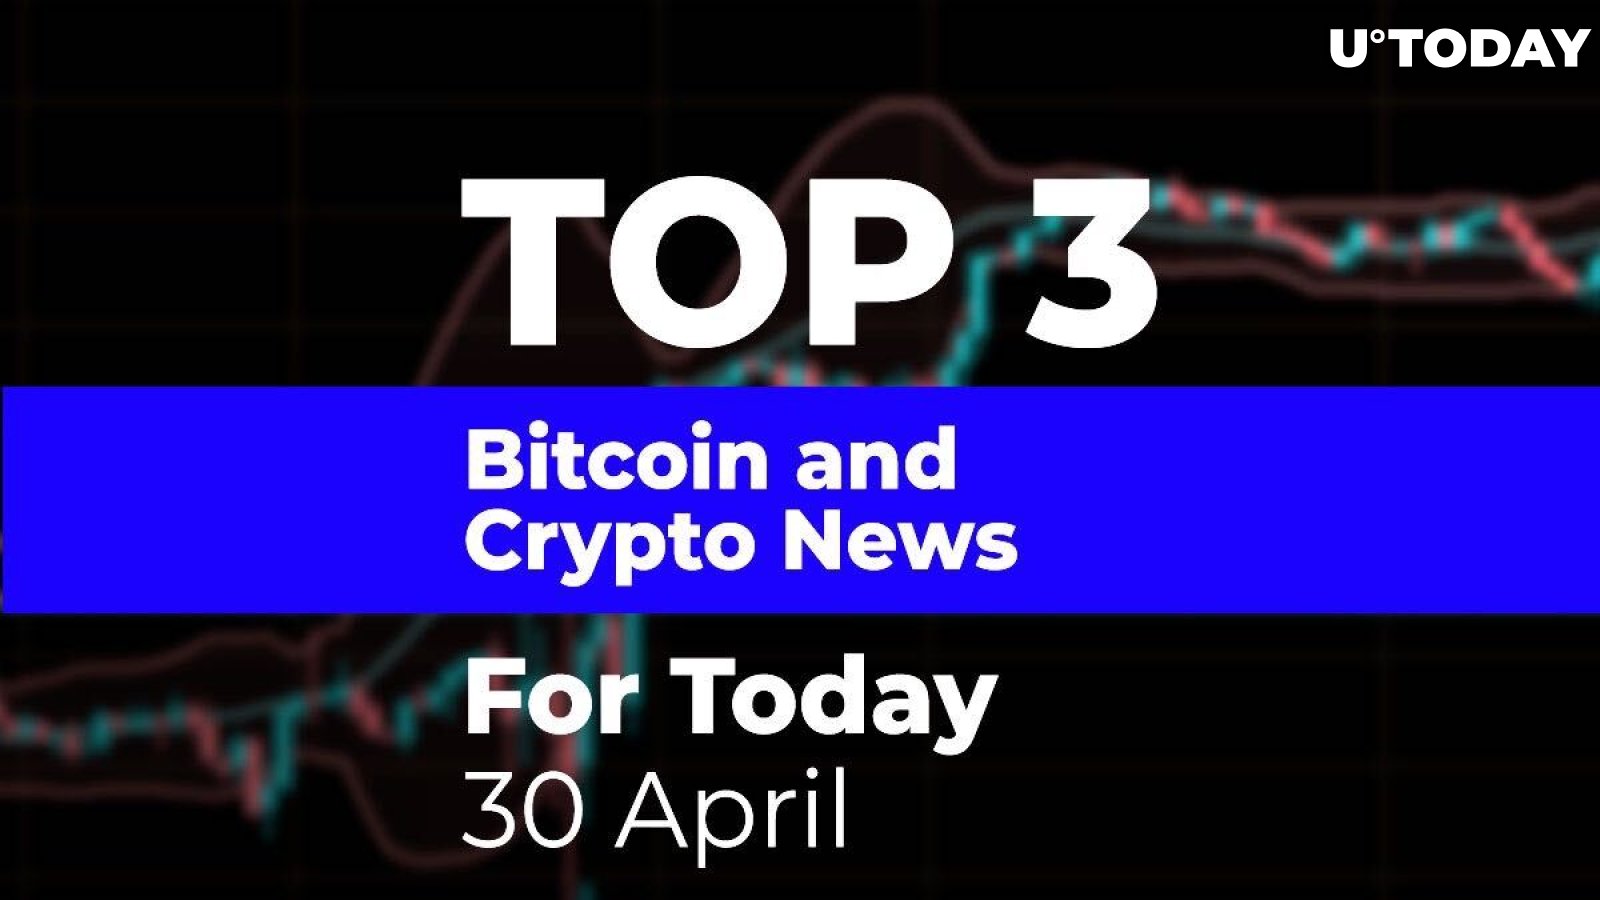 TOP 3 Bitcoin and Crypto News for Today: 30 April – XRP Prediction, BitMEX Fed, & LINK and XTZ Tie-Up